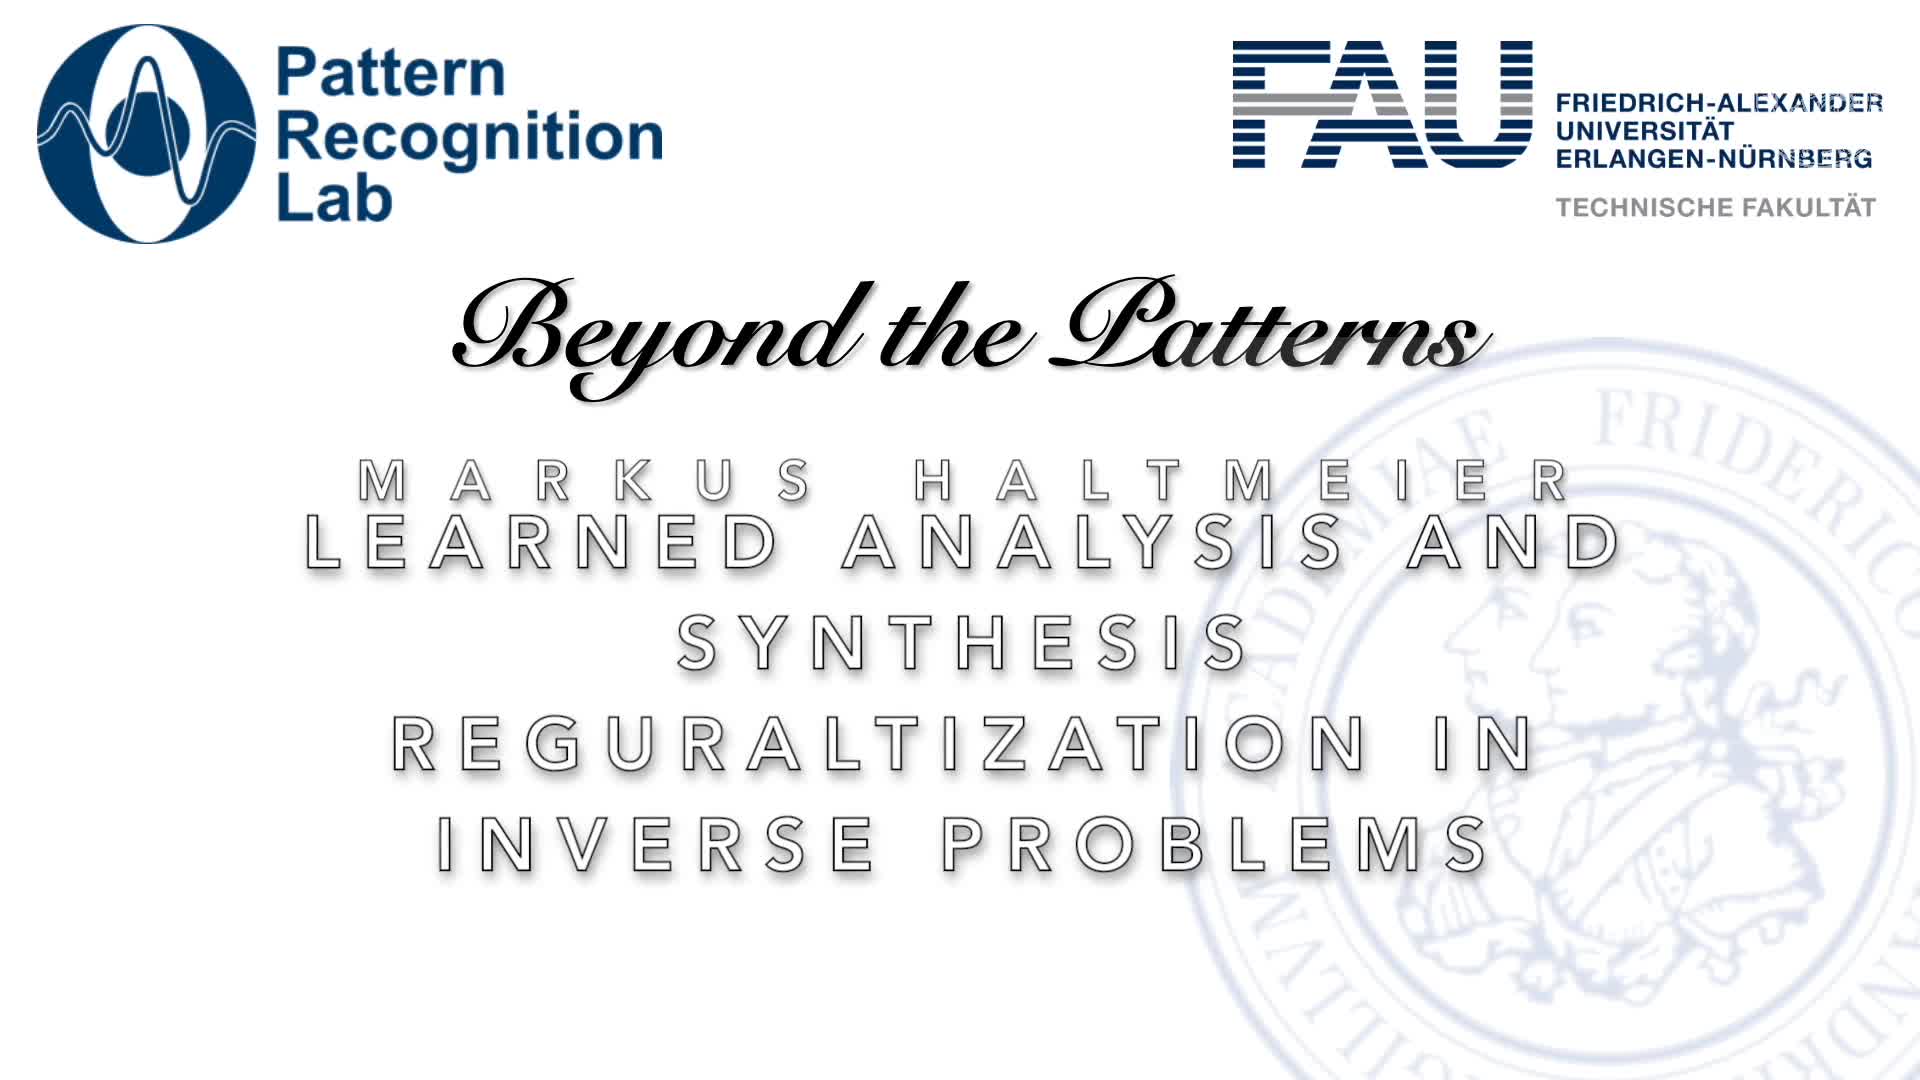 Beyond the Patterns - Markus Haltmeier - Learned Analysis and Synthesis Regularisation of Inverse Problems preview image